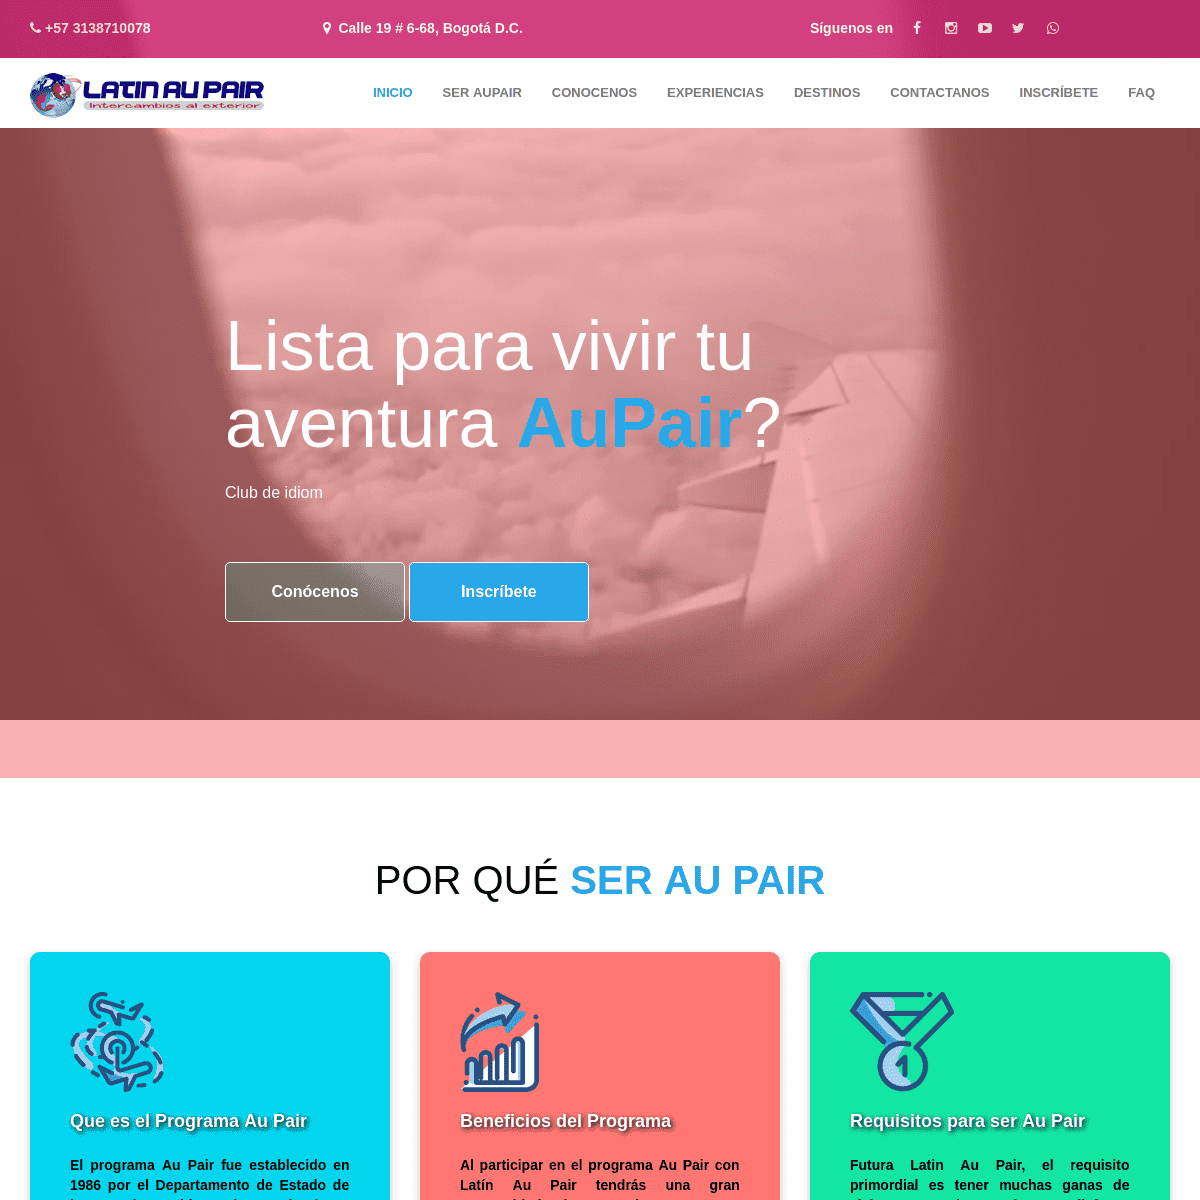 A complete backup of latin-aupair.org